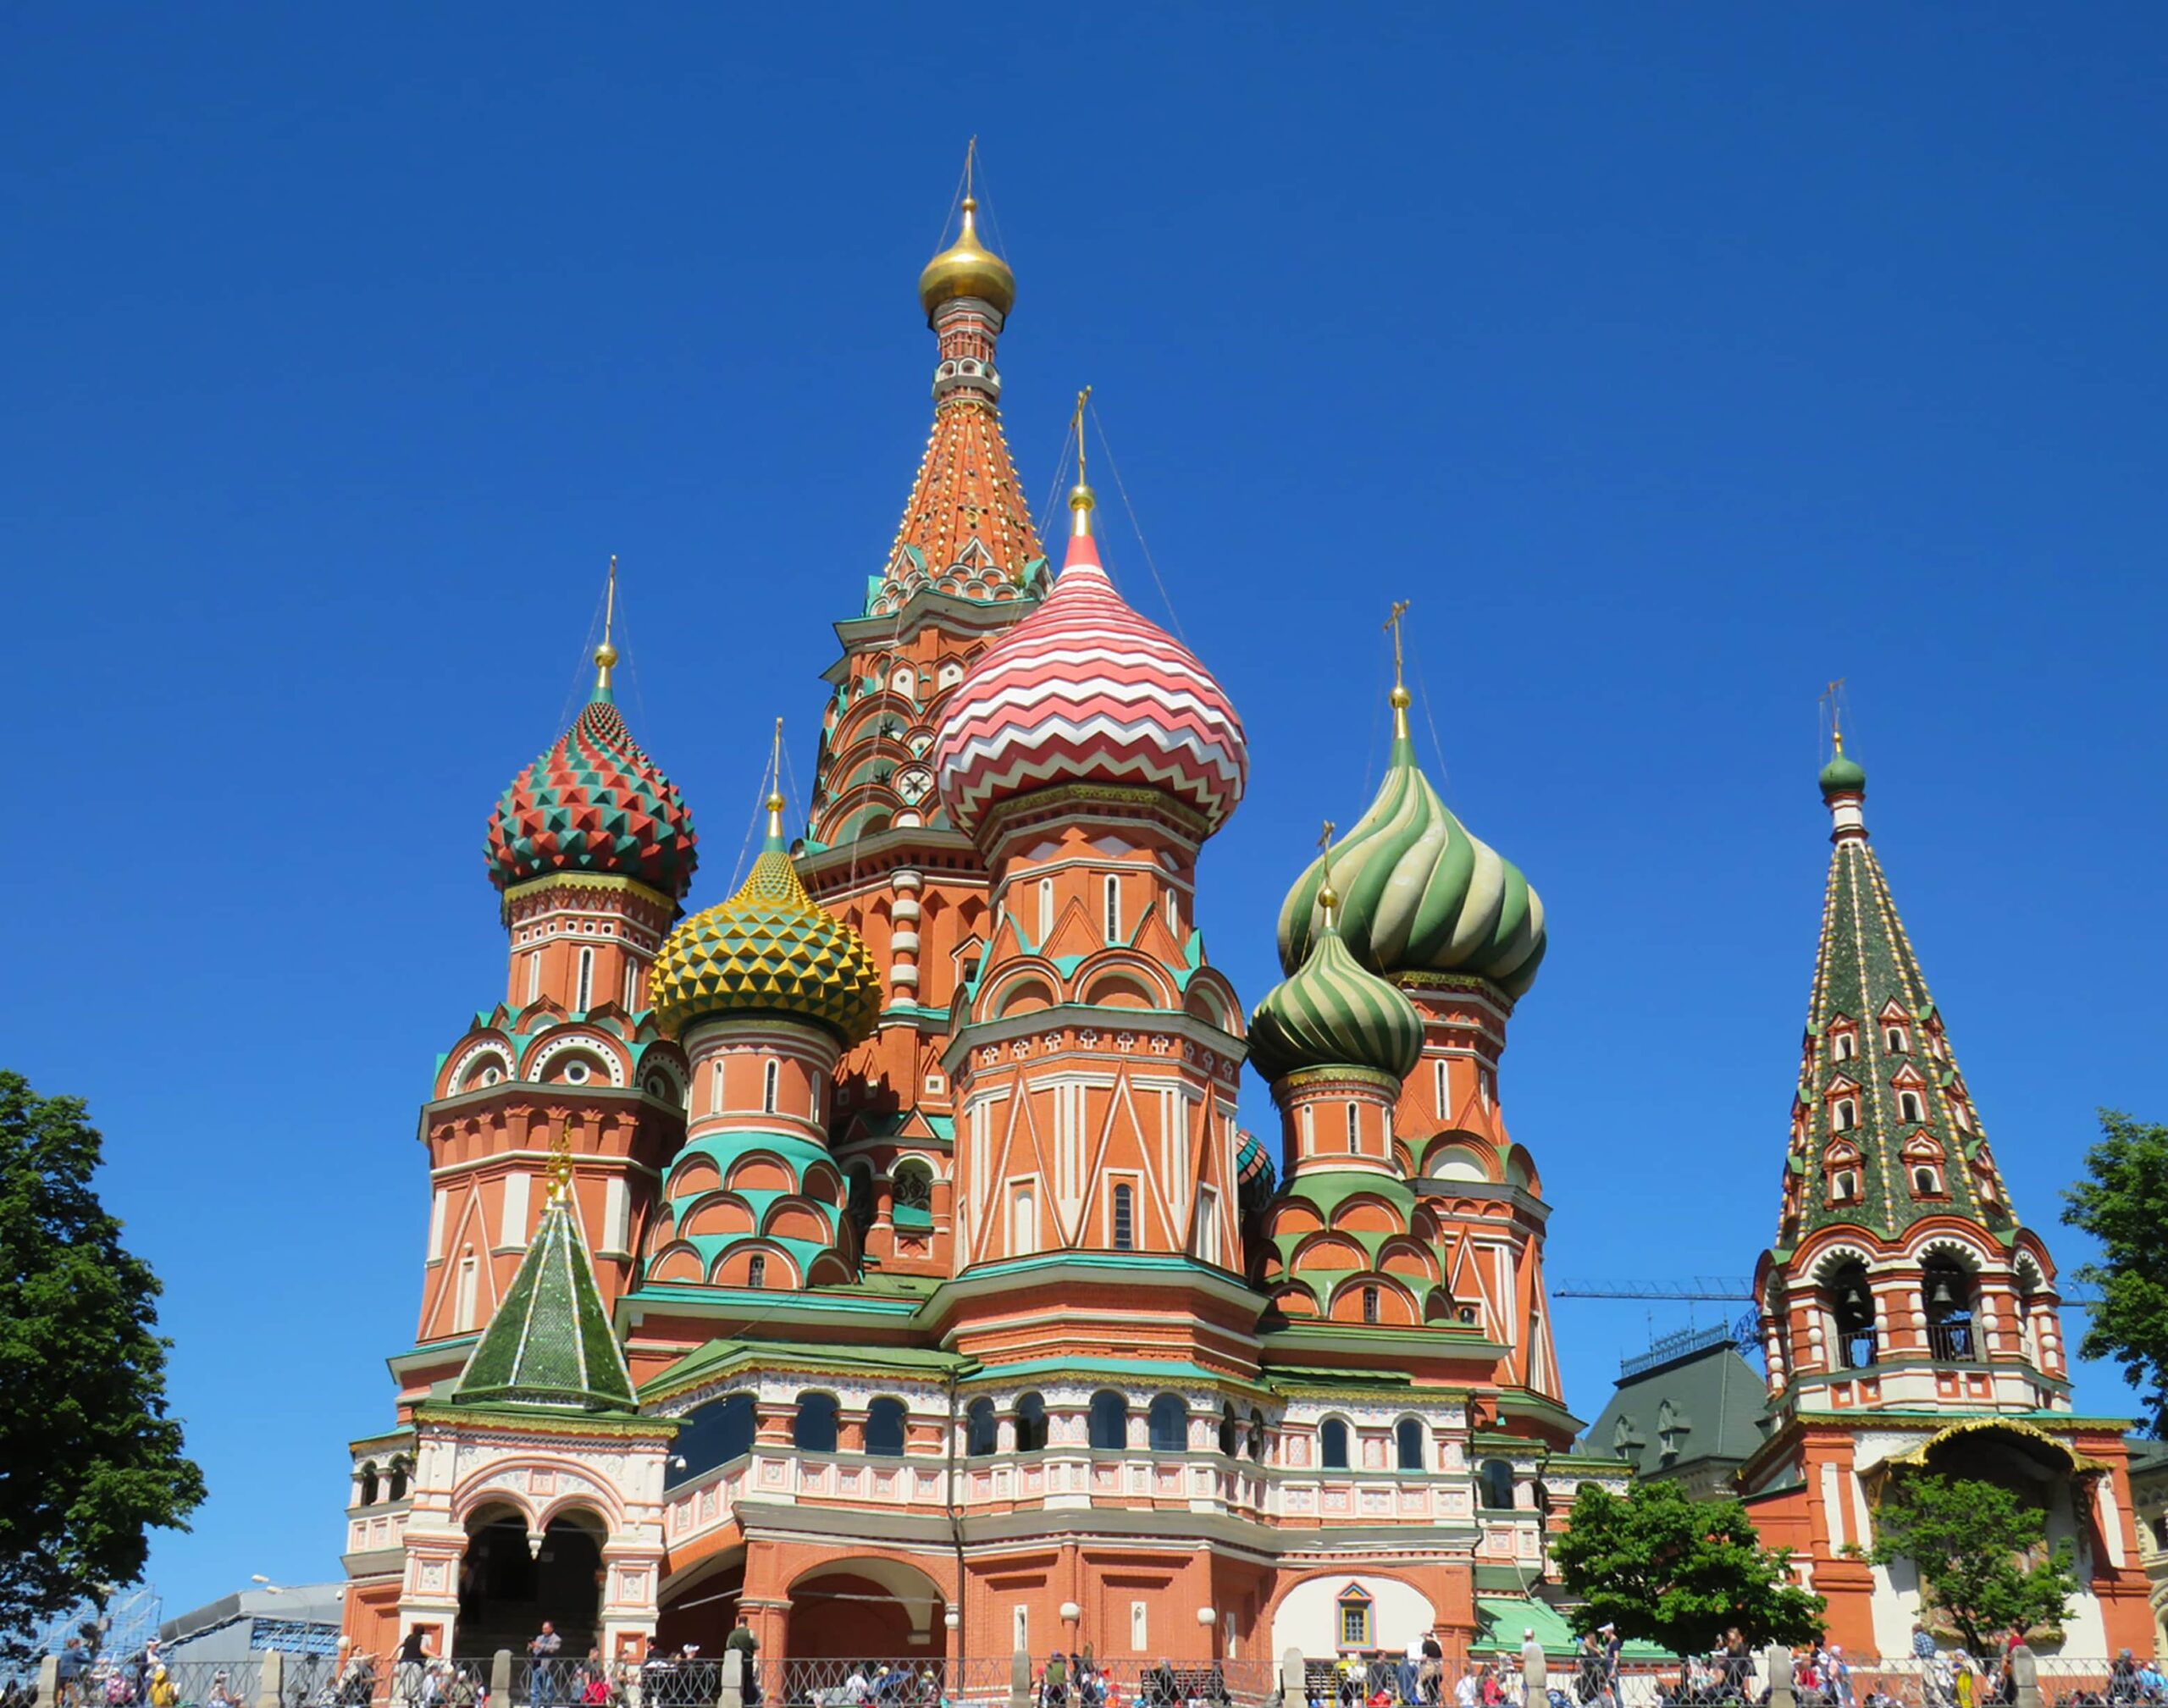 St. Basil's Cathedral on the Red Square in Moscow